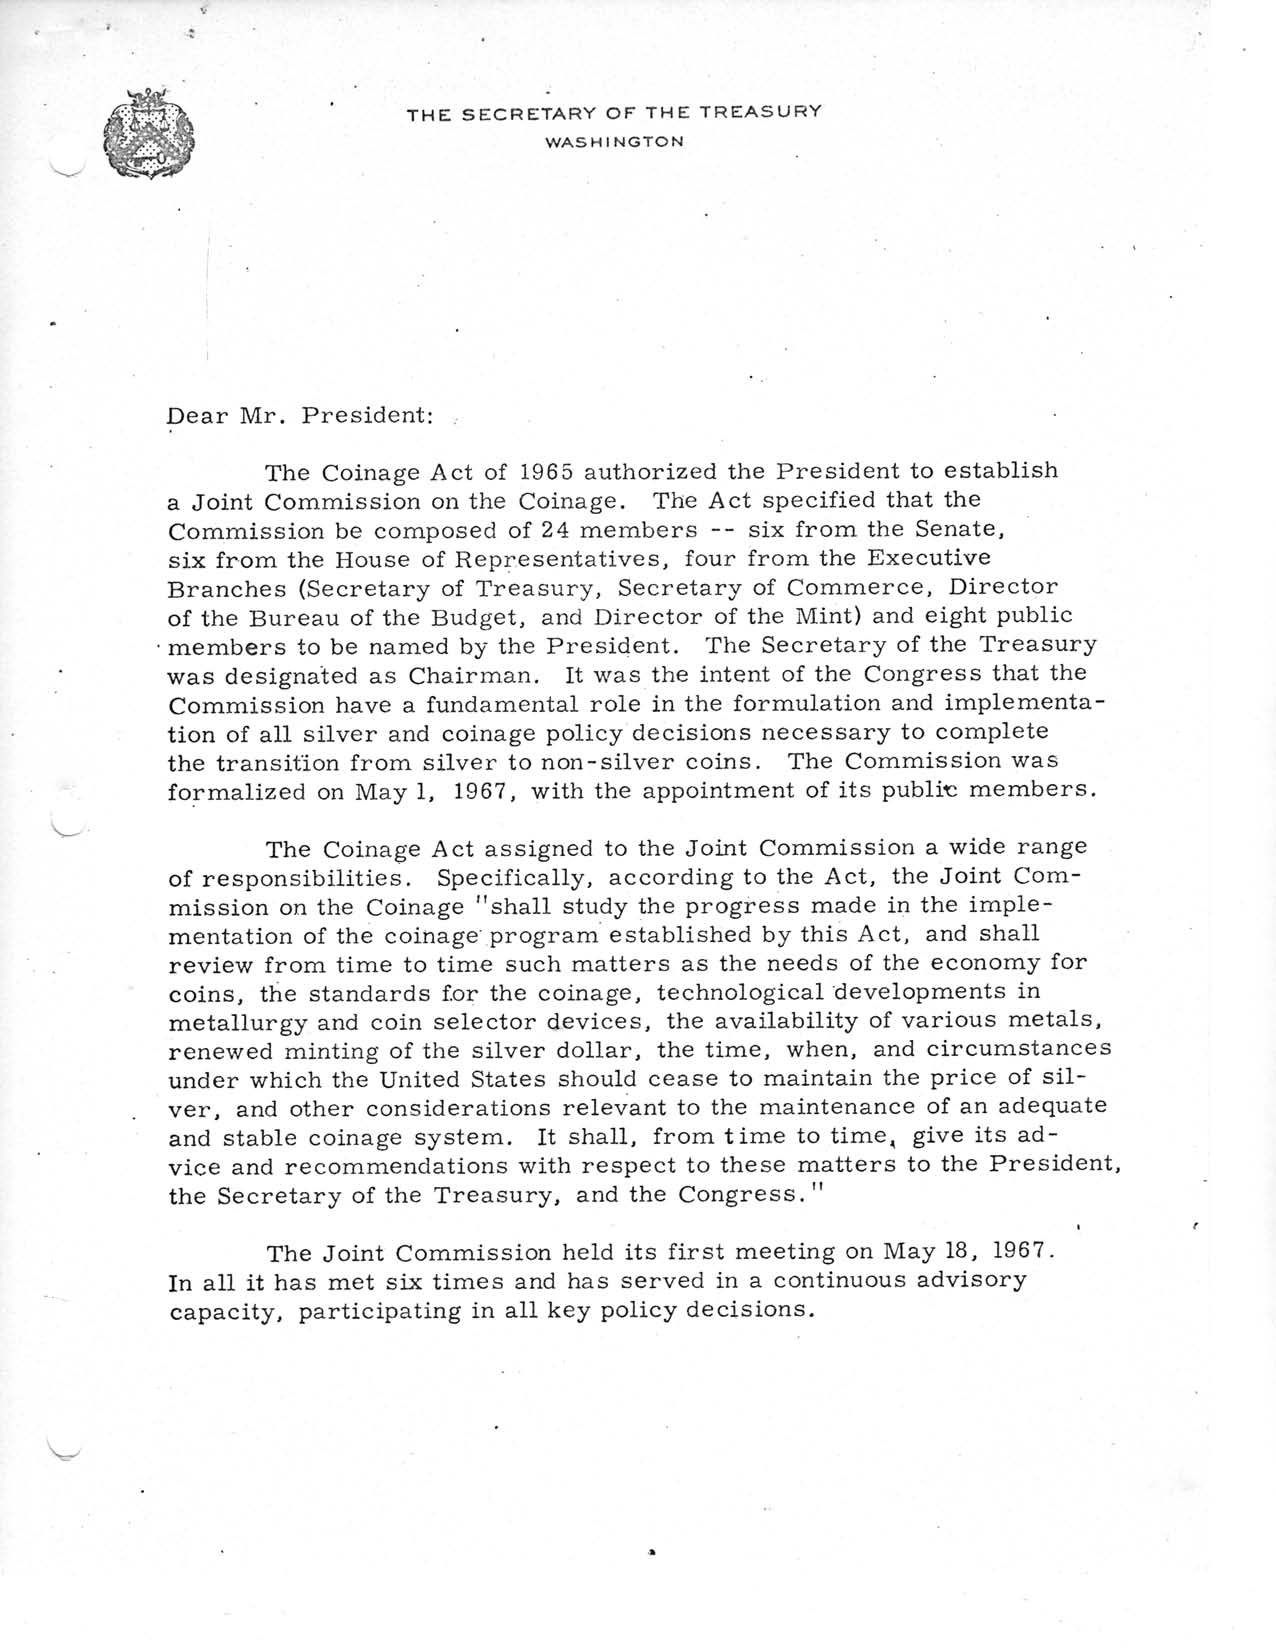 Historic Press Release: Letter to President From Treasury Secretary, Page 2